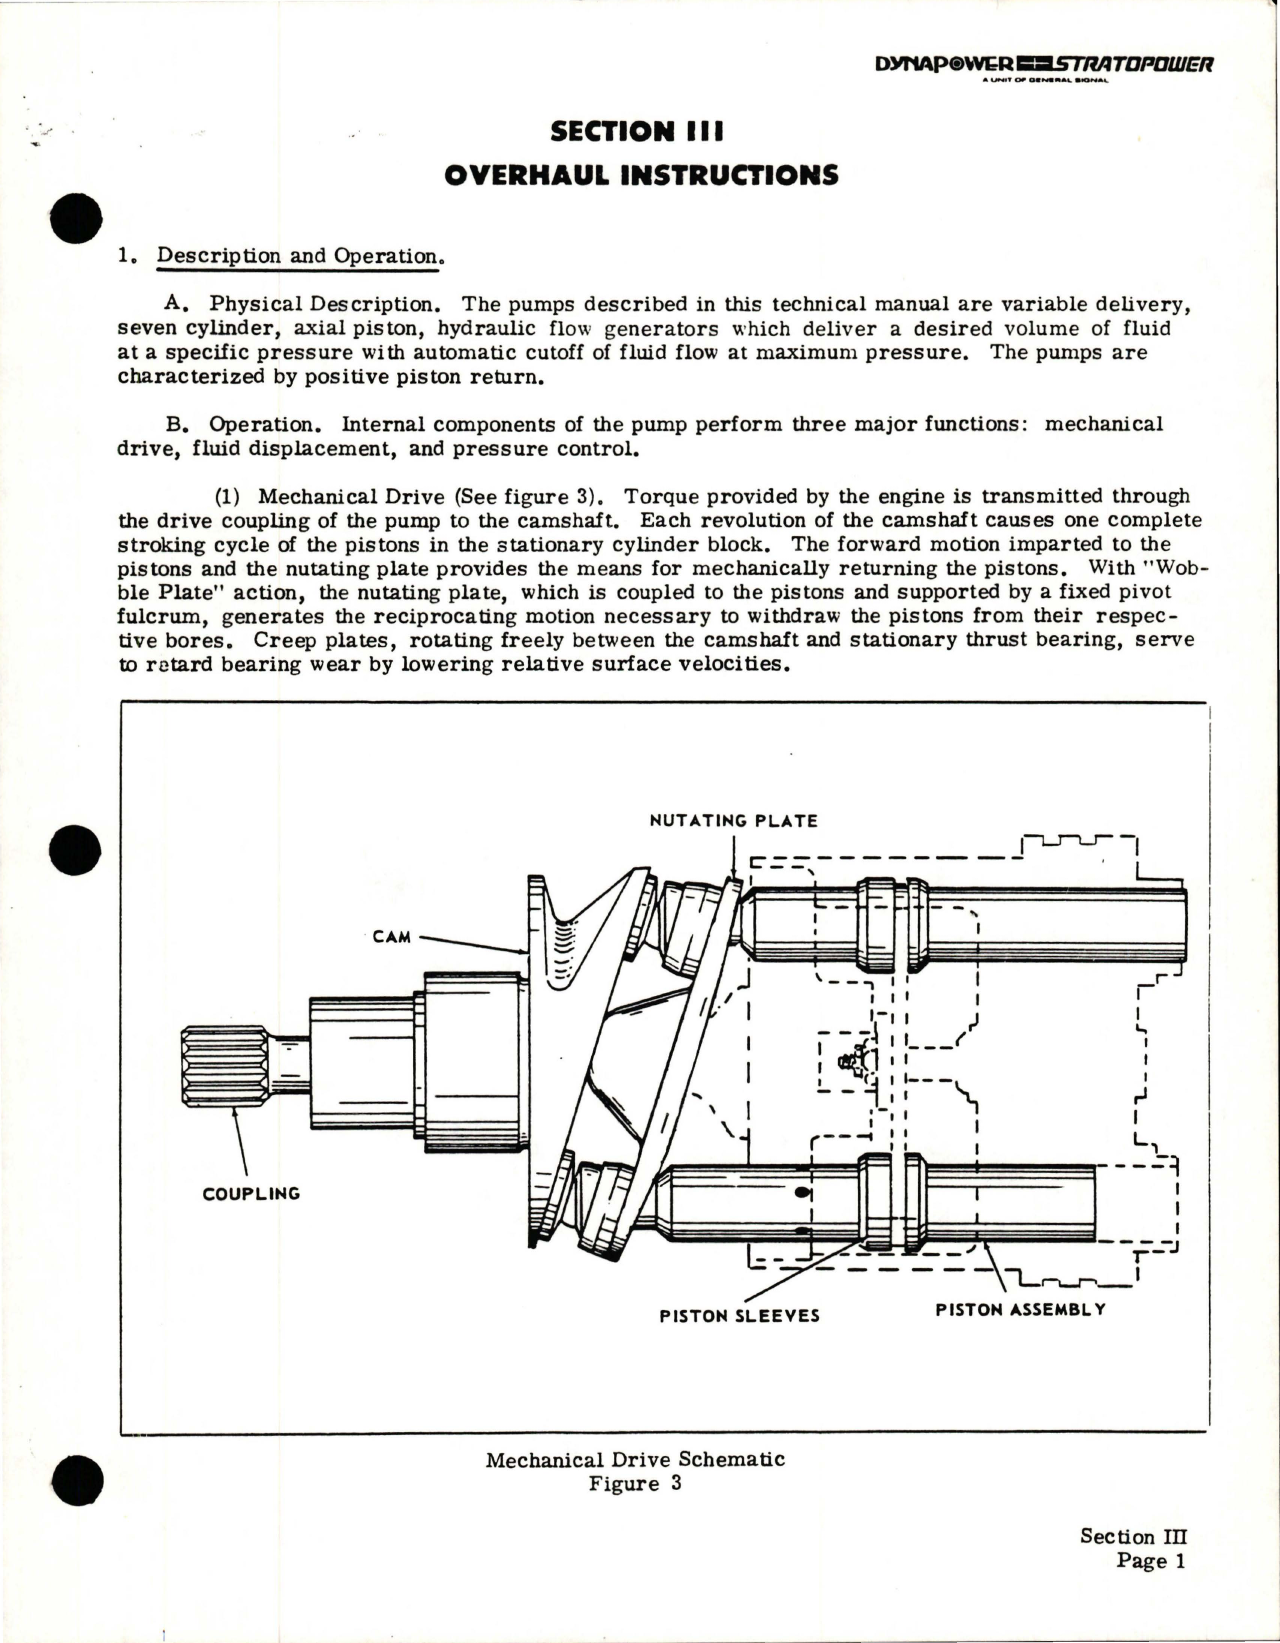 Sample page 9 from AirCorps Library document: Overhaul Instructions with Parts Breakdown for Stratopower Hydraulic Pump 65W Series